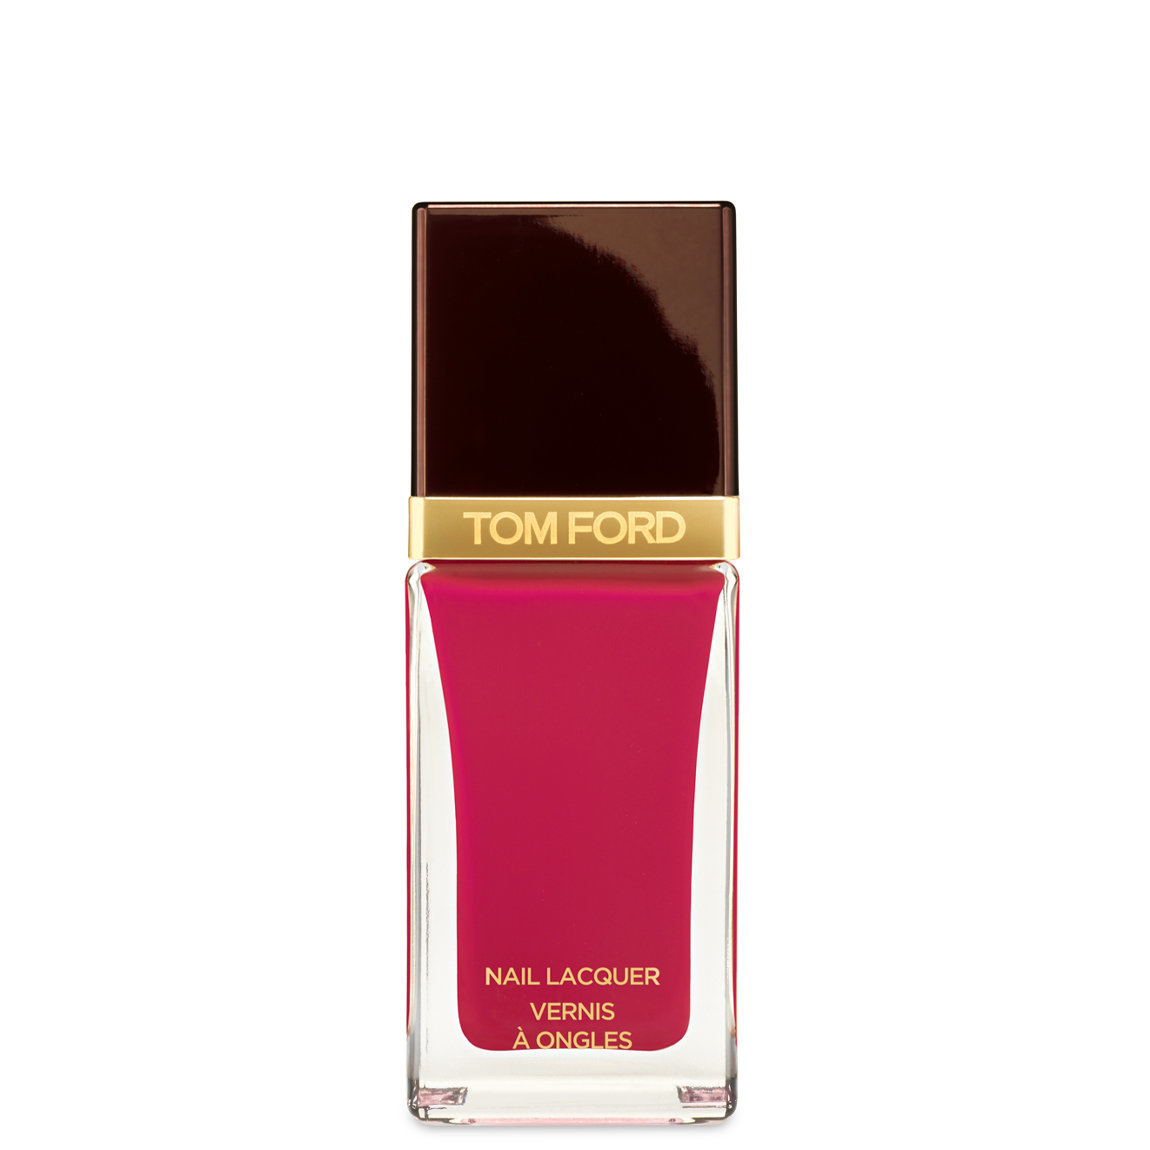 TOM FORD Nail Lacquer Indian Pink alternative view 1.